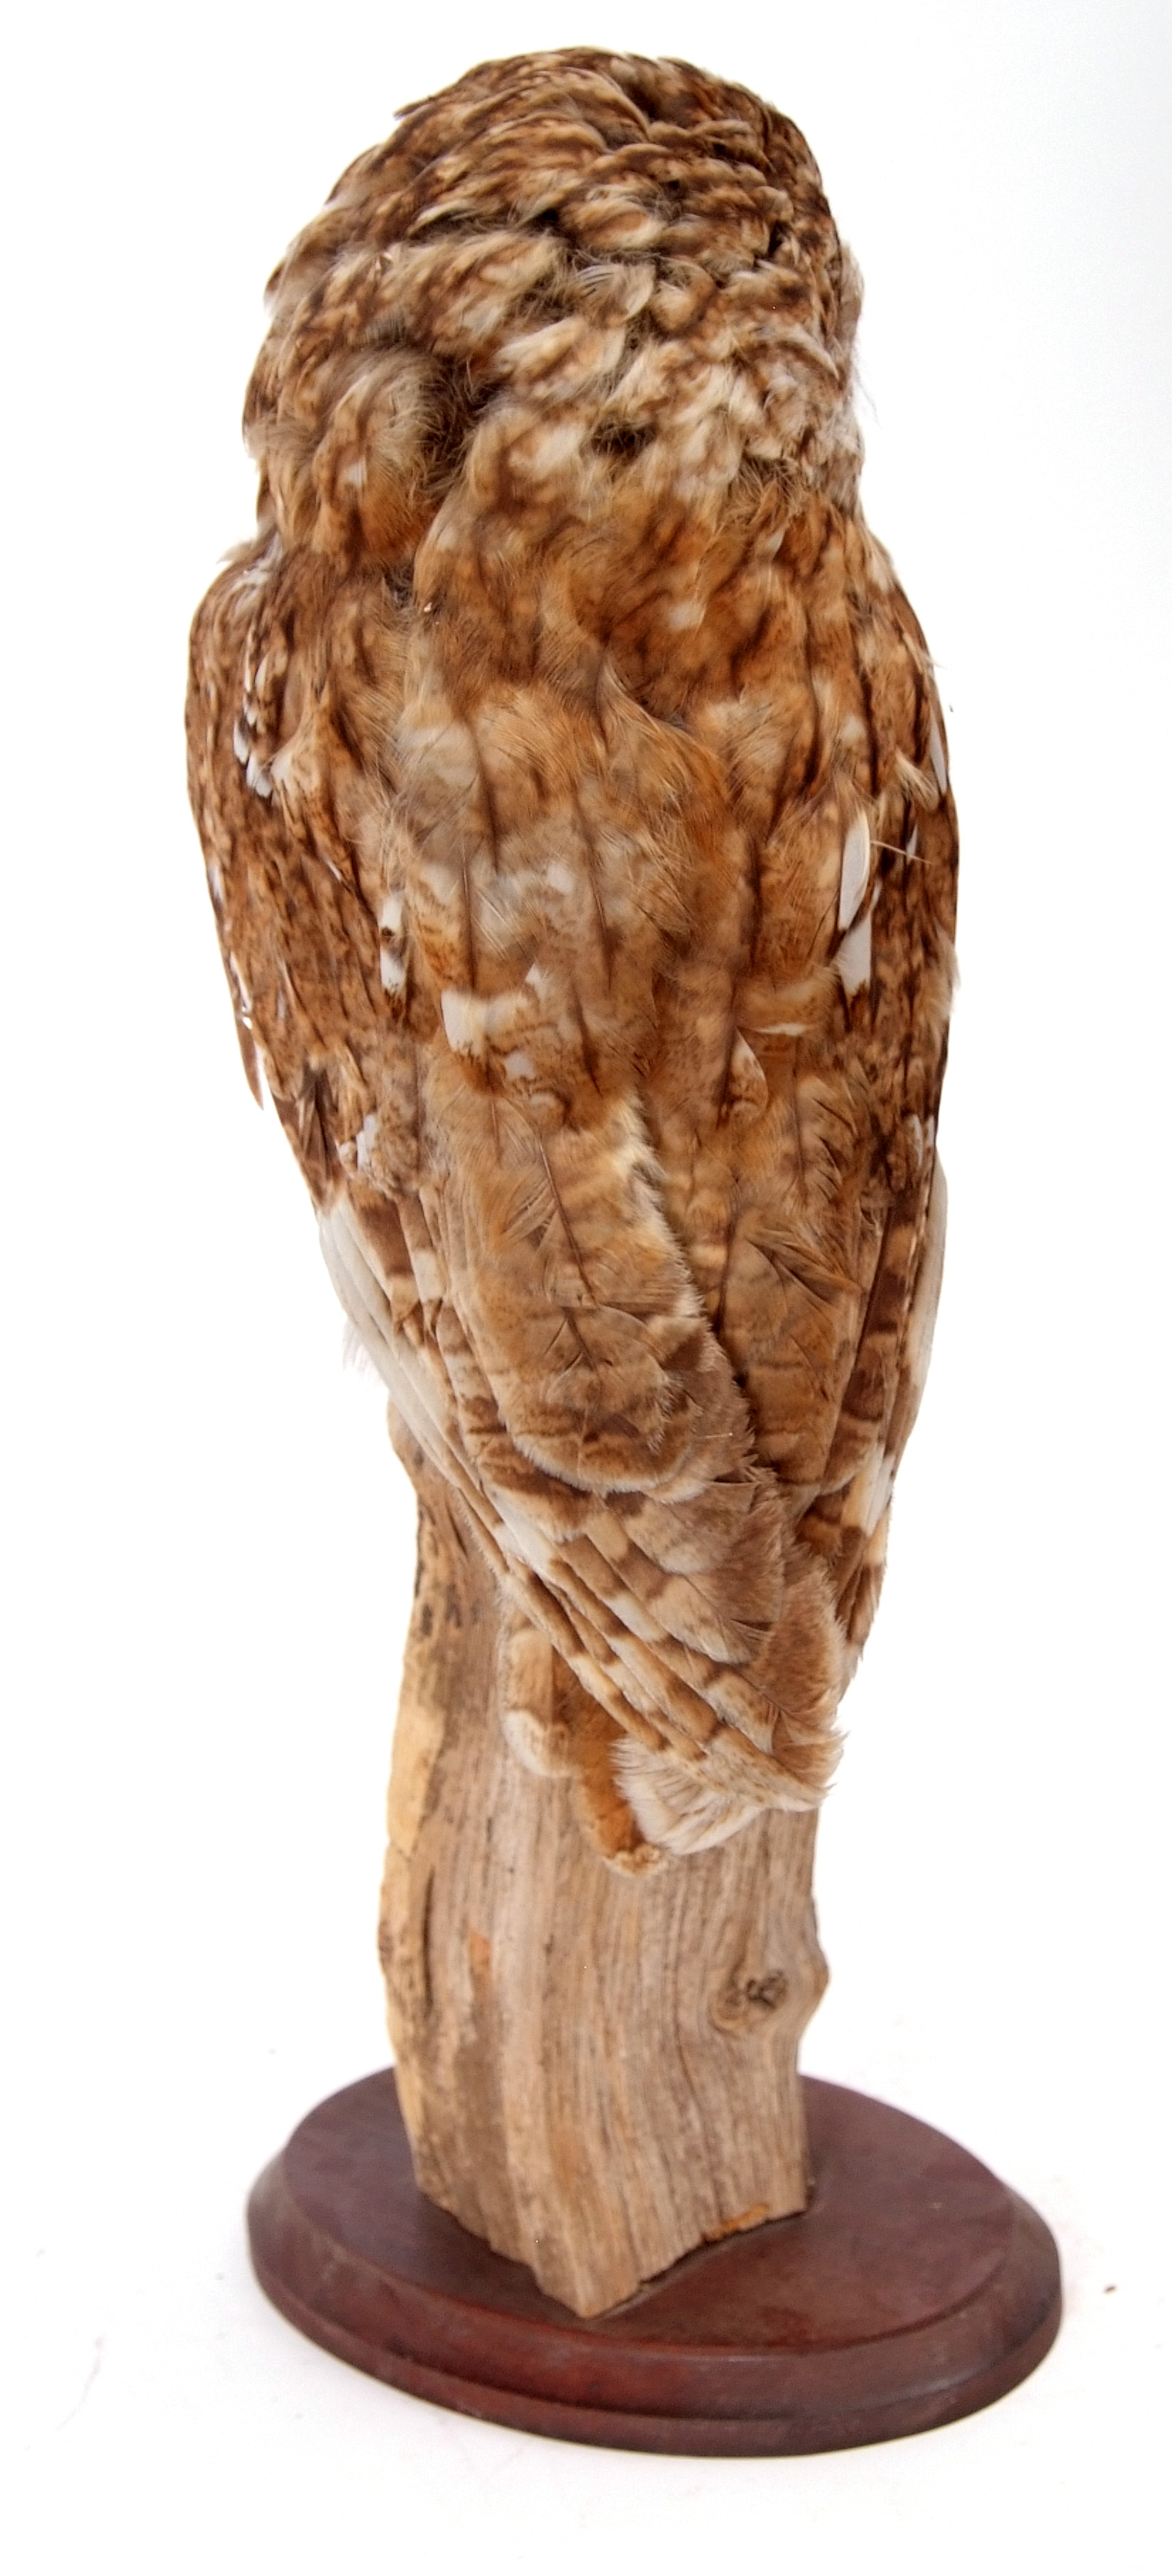 Taxidemy uncased Tawny Owl on wooden stump, 47cm high, sold with Article 10 licence No 574975/02 - Image 3 of 3